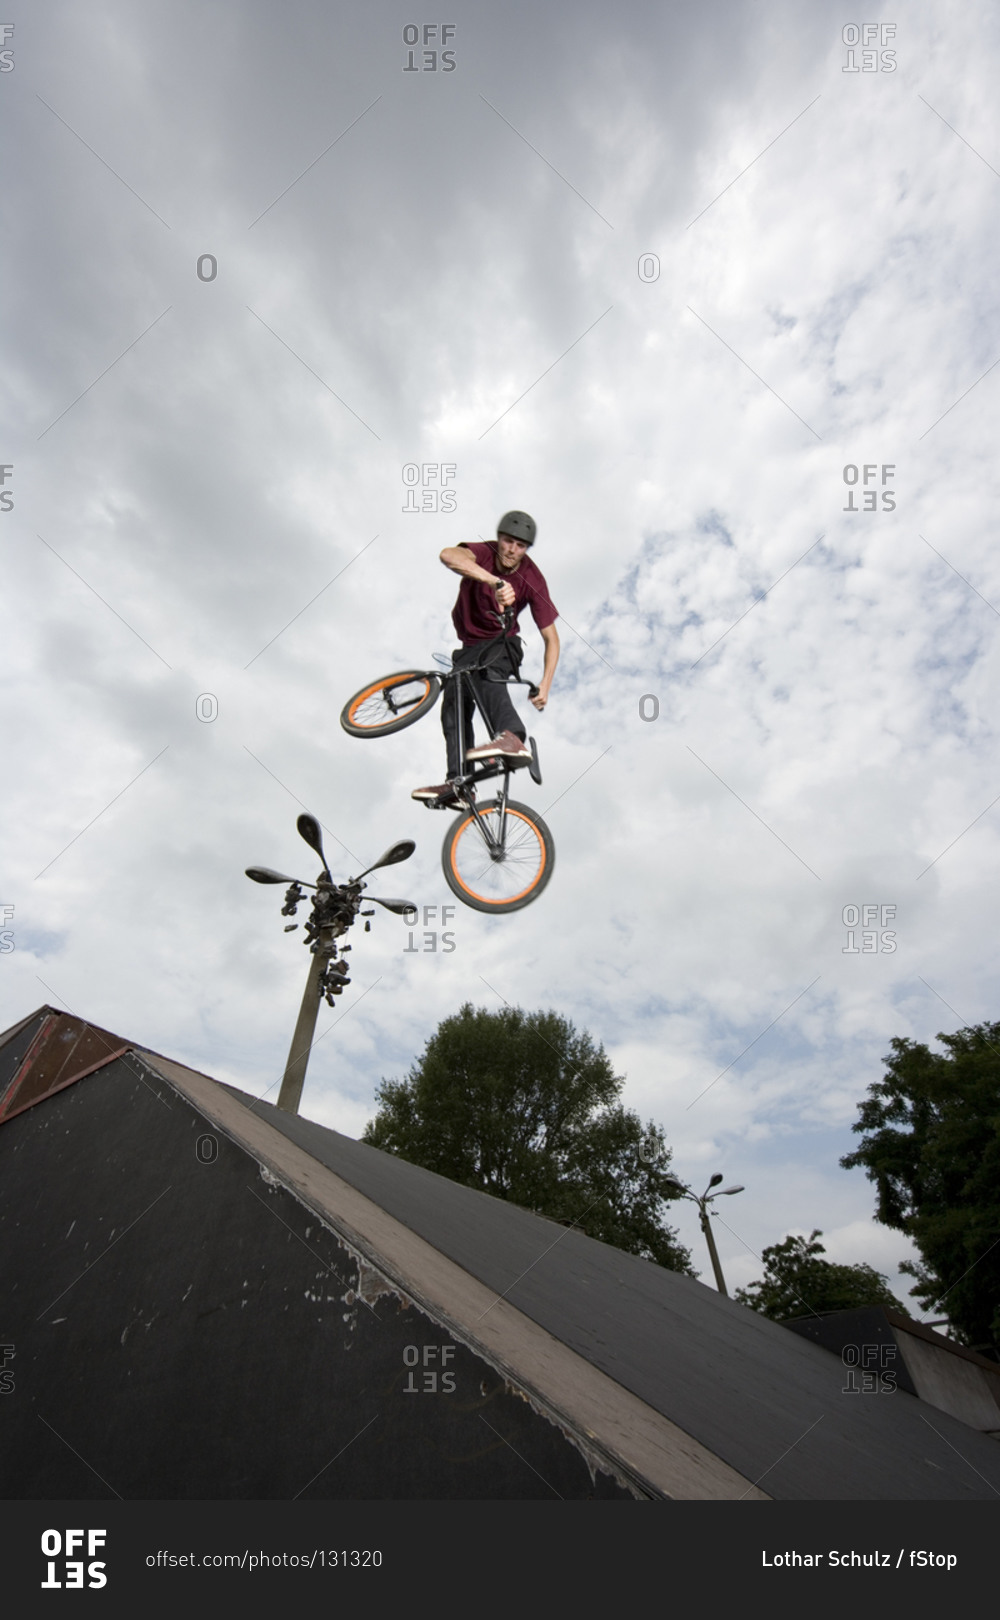 A young man in mid-air doing a stunt on a BMX bike